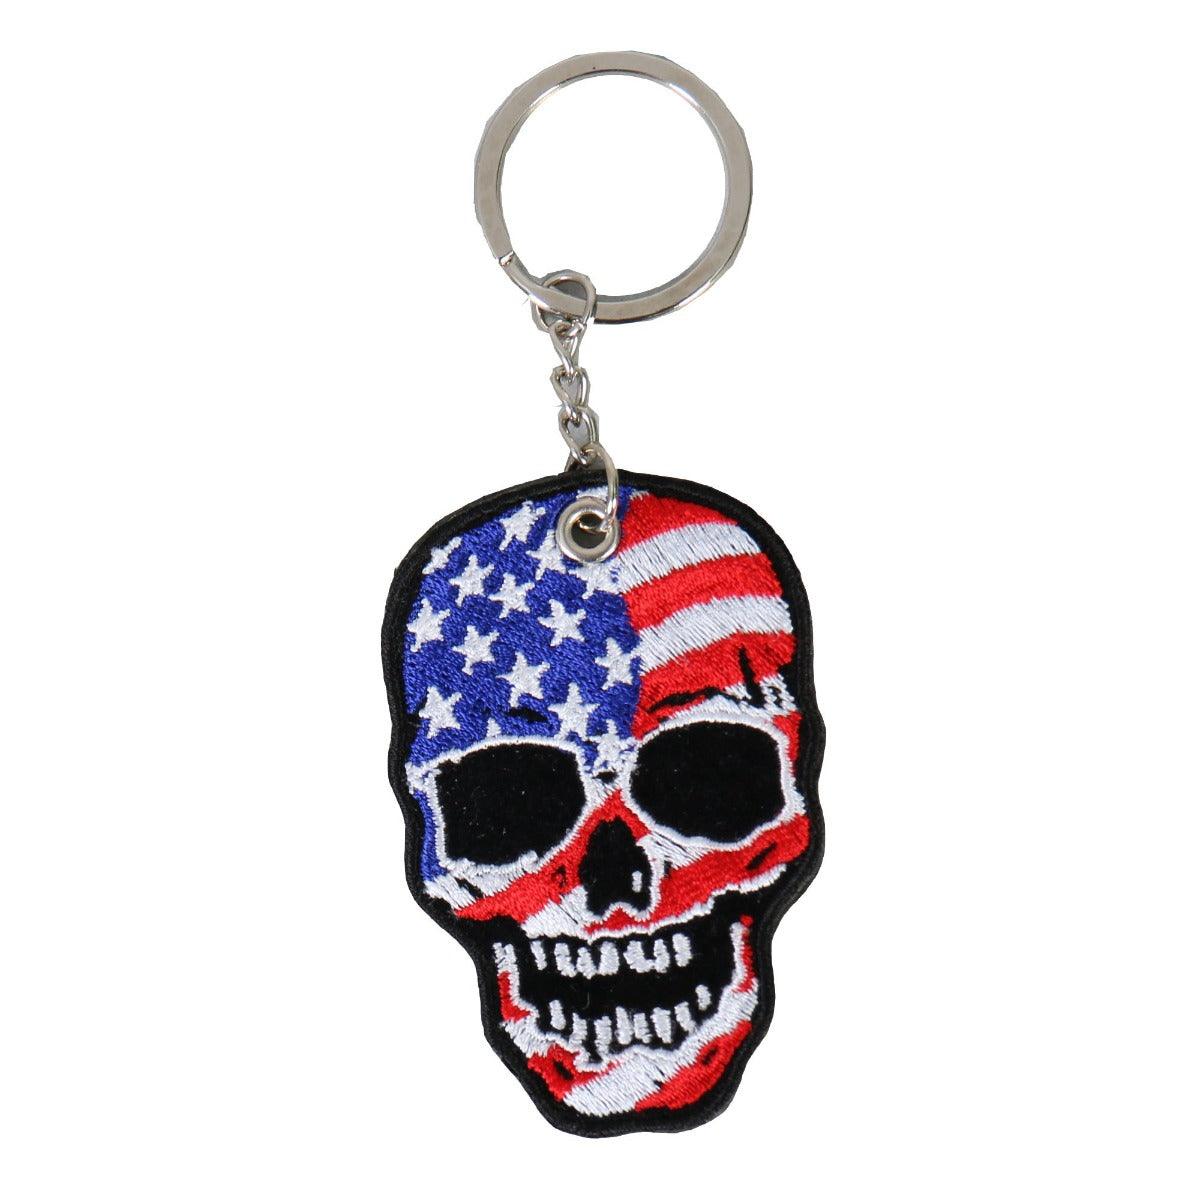 Hot Leathers American Flag Skull Embroidered Key Chain - American Legend Rider